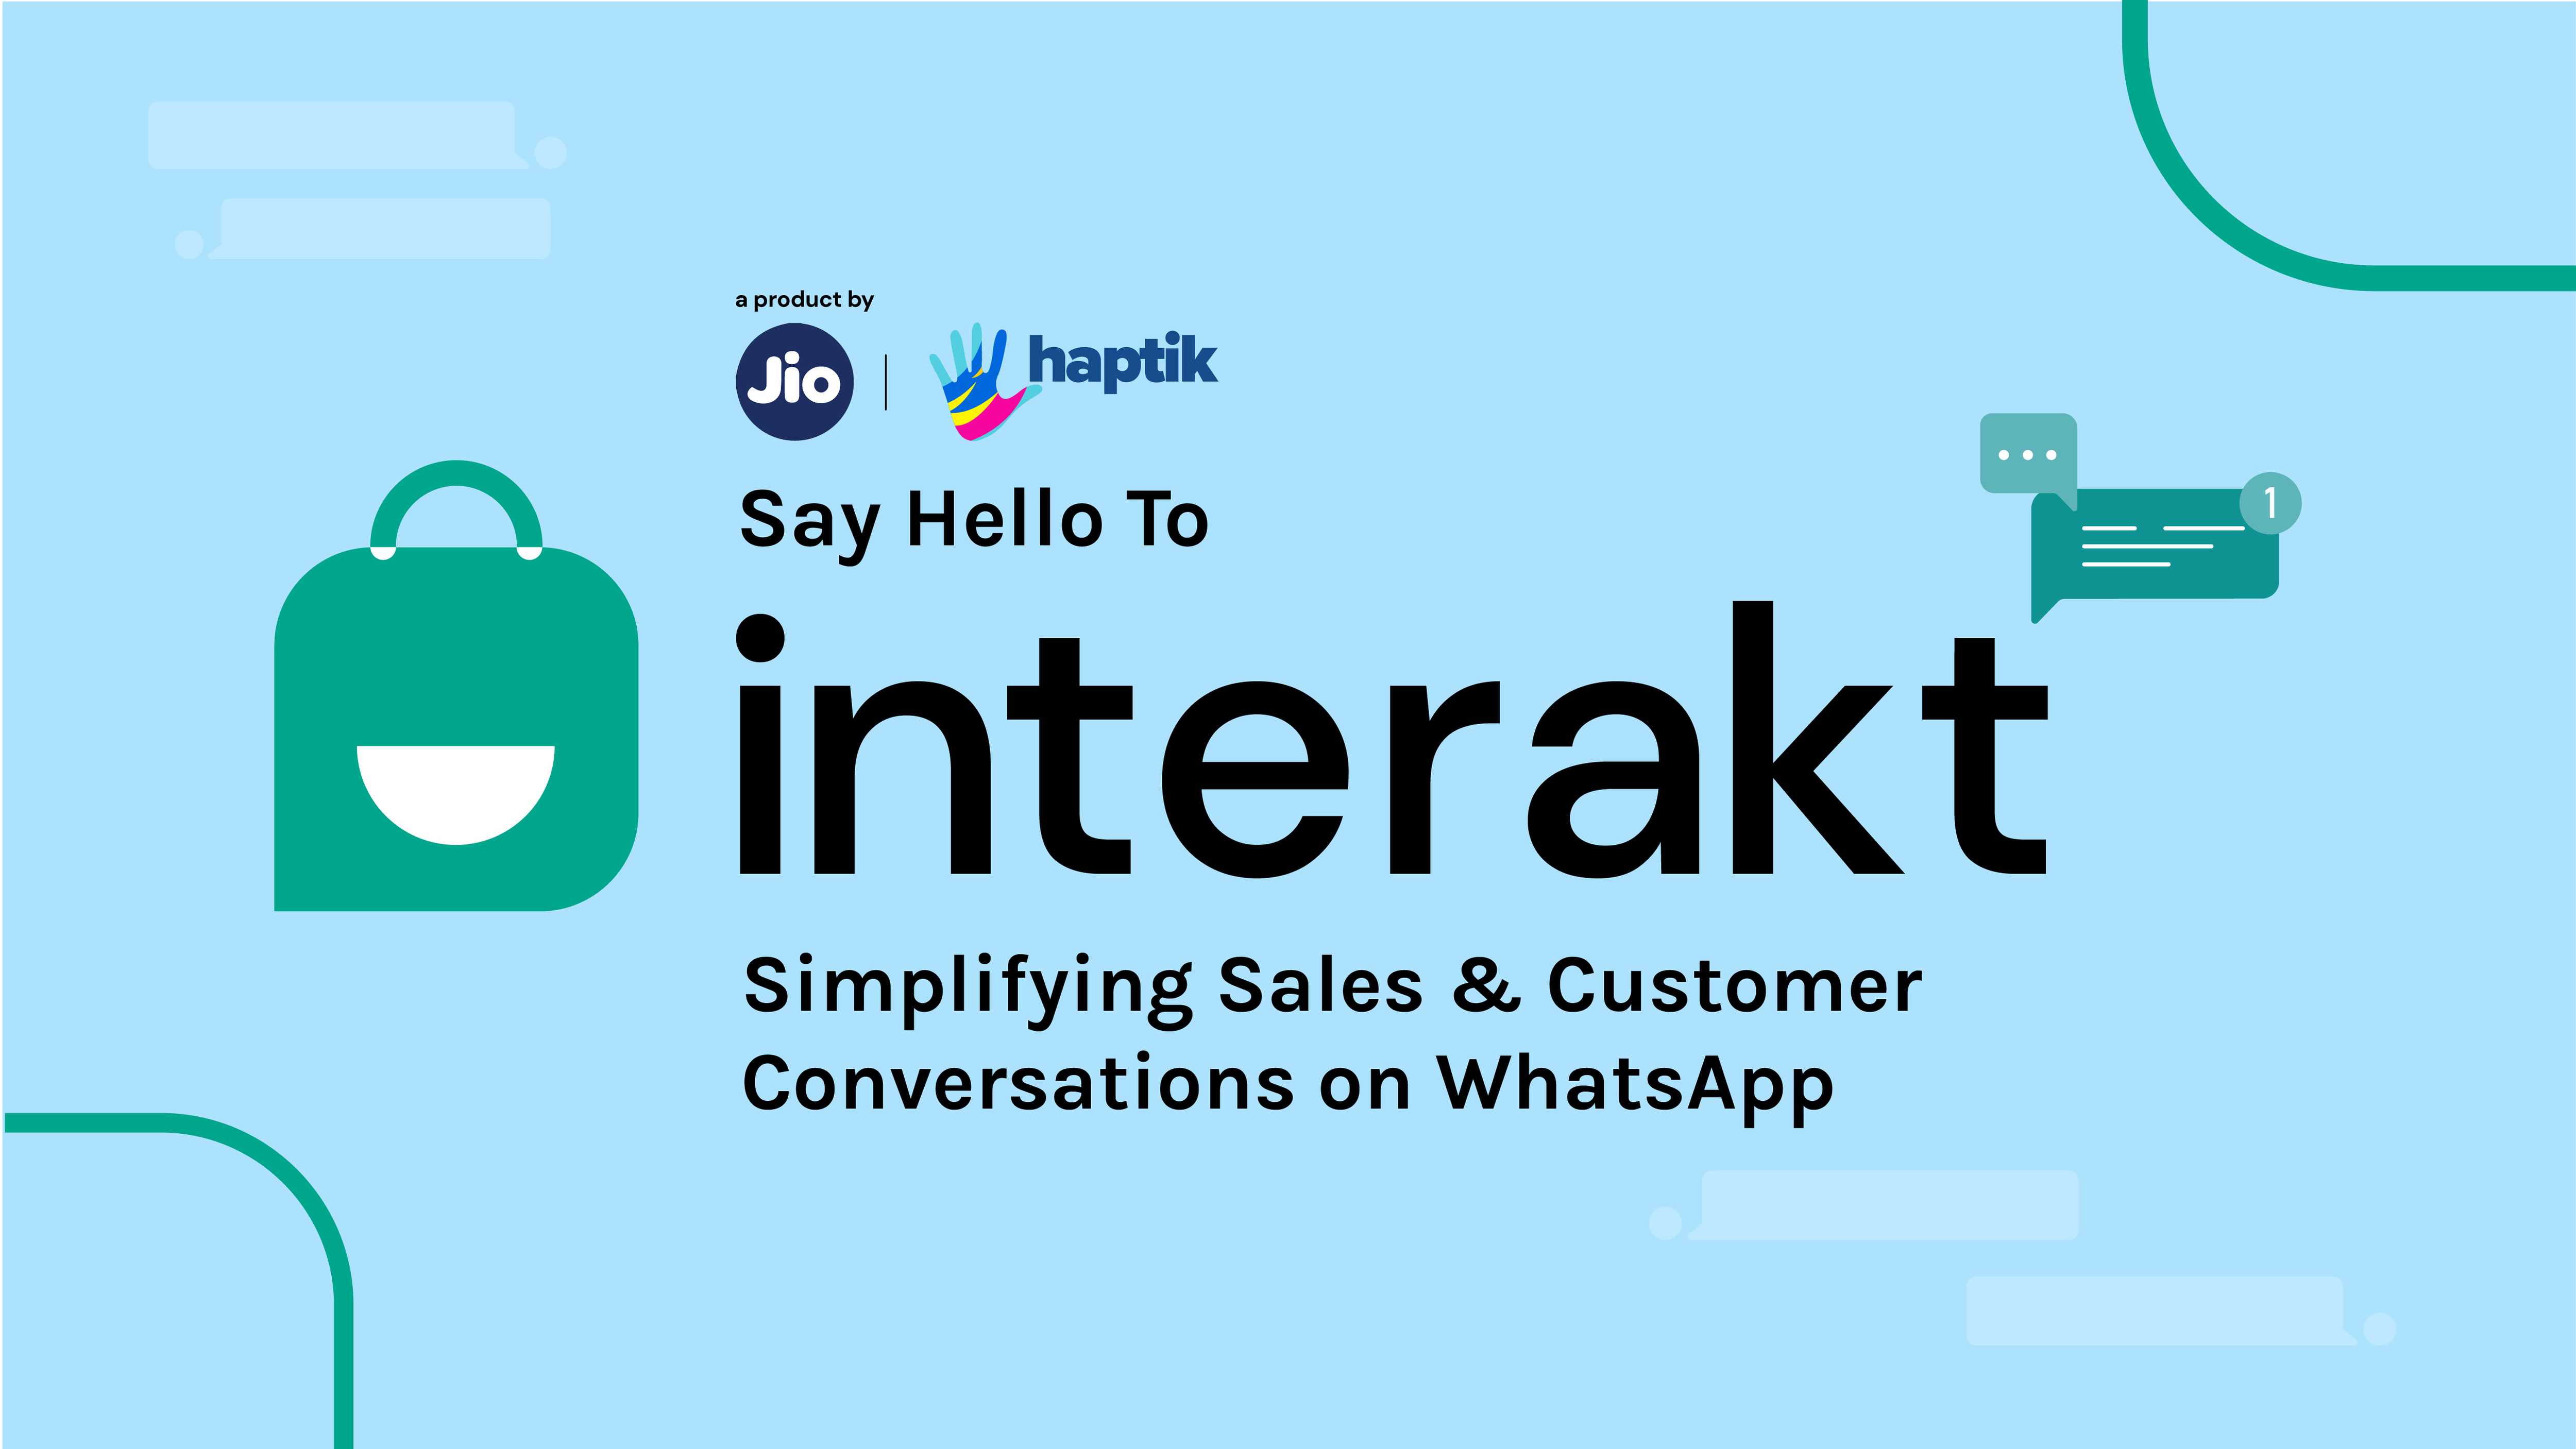 A One-Stop Solution for SMBs to Drive Sales on WhatsApp